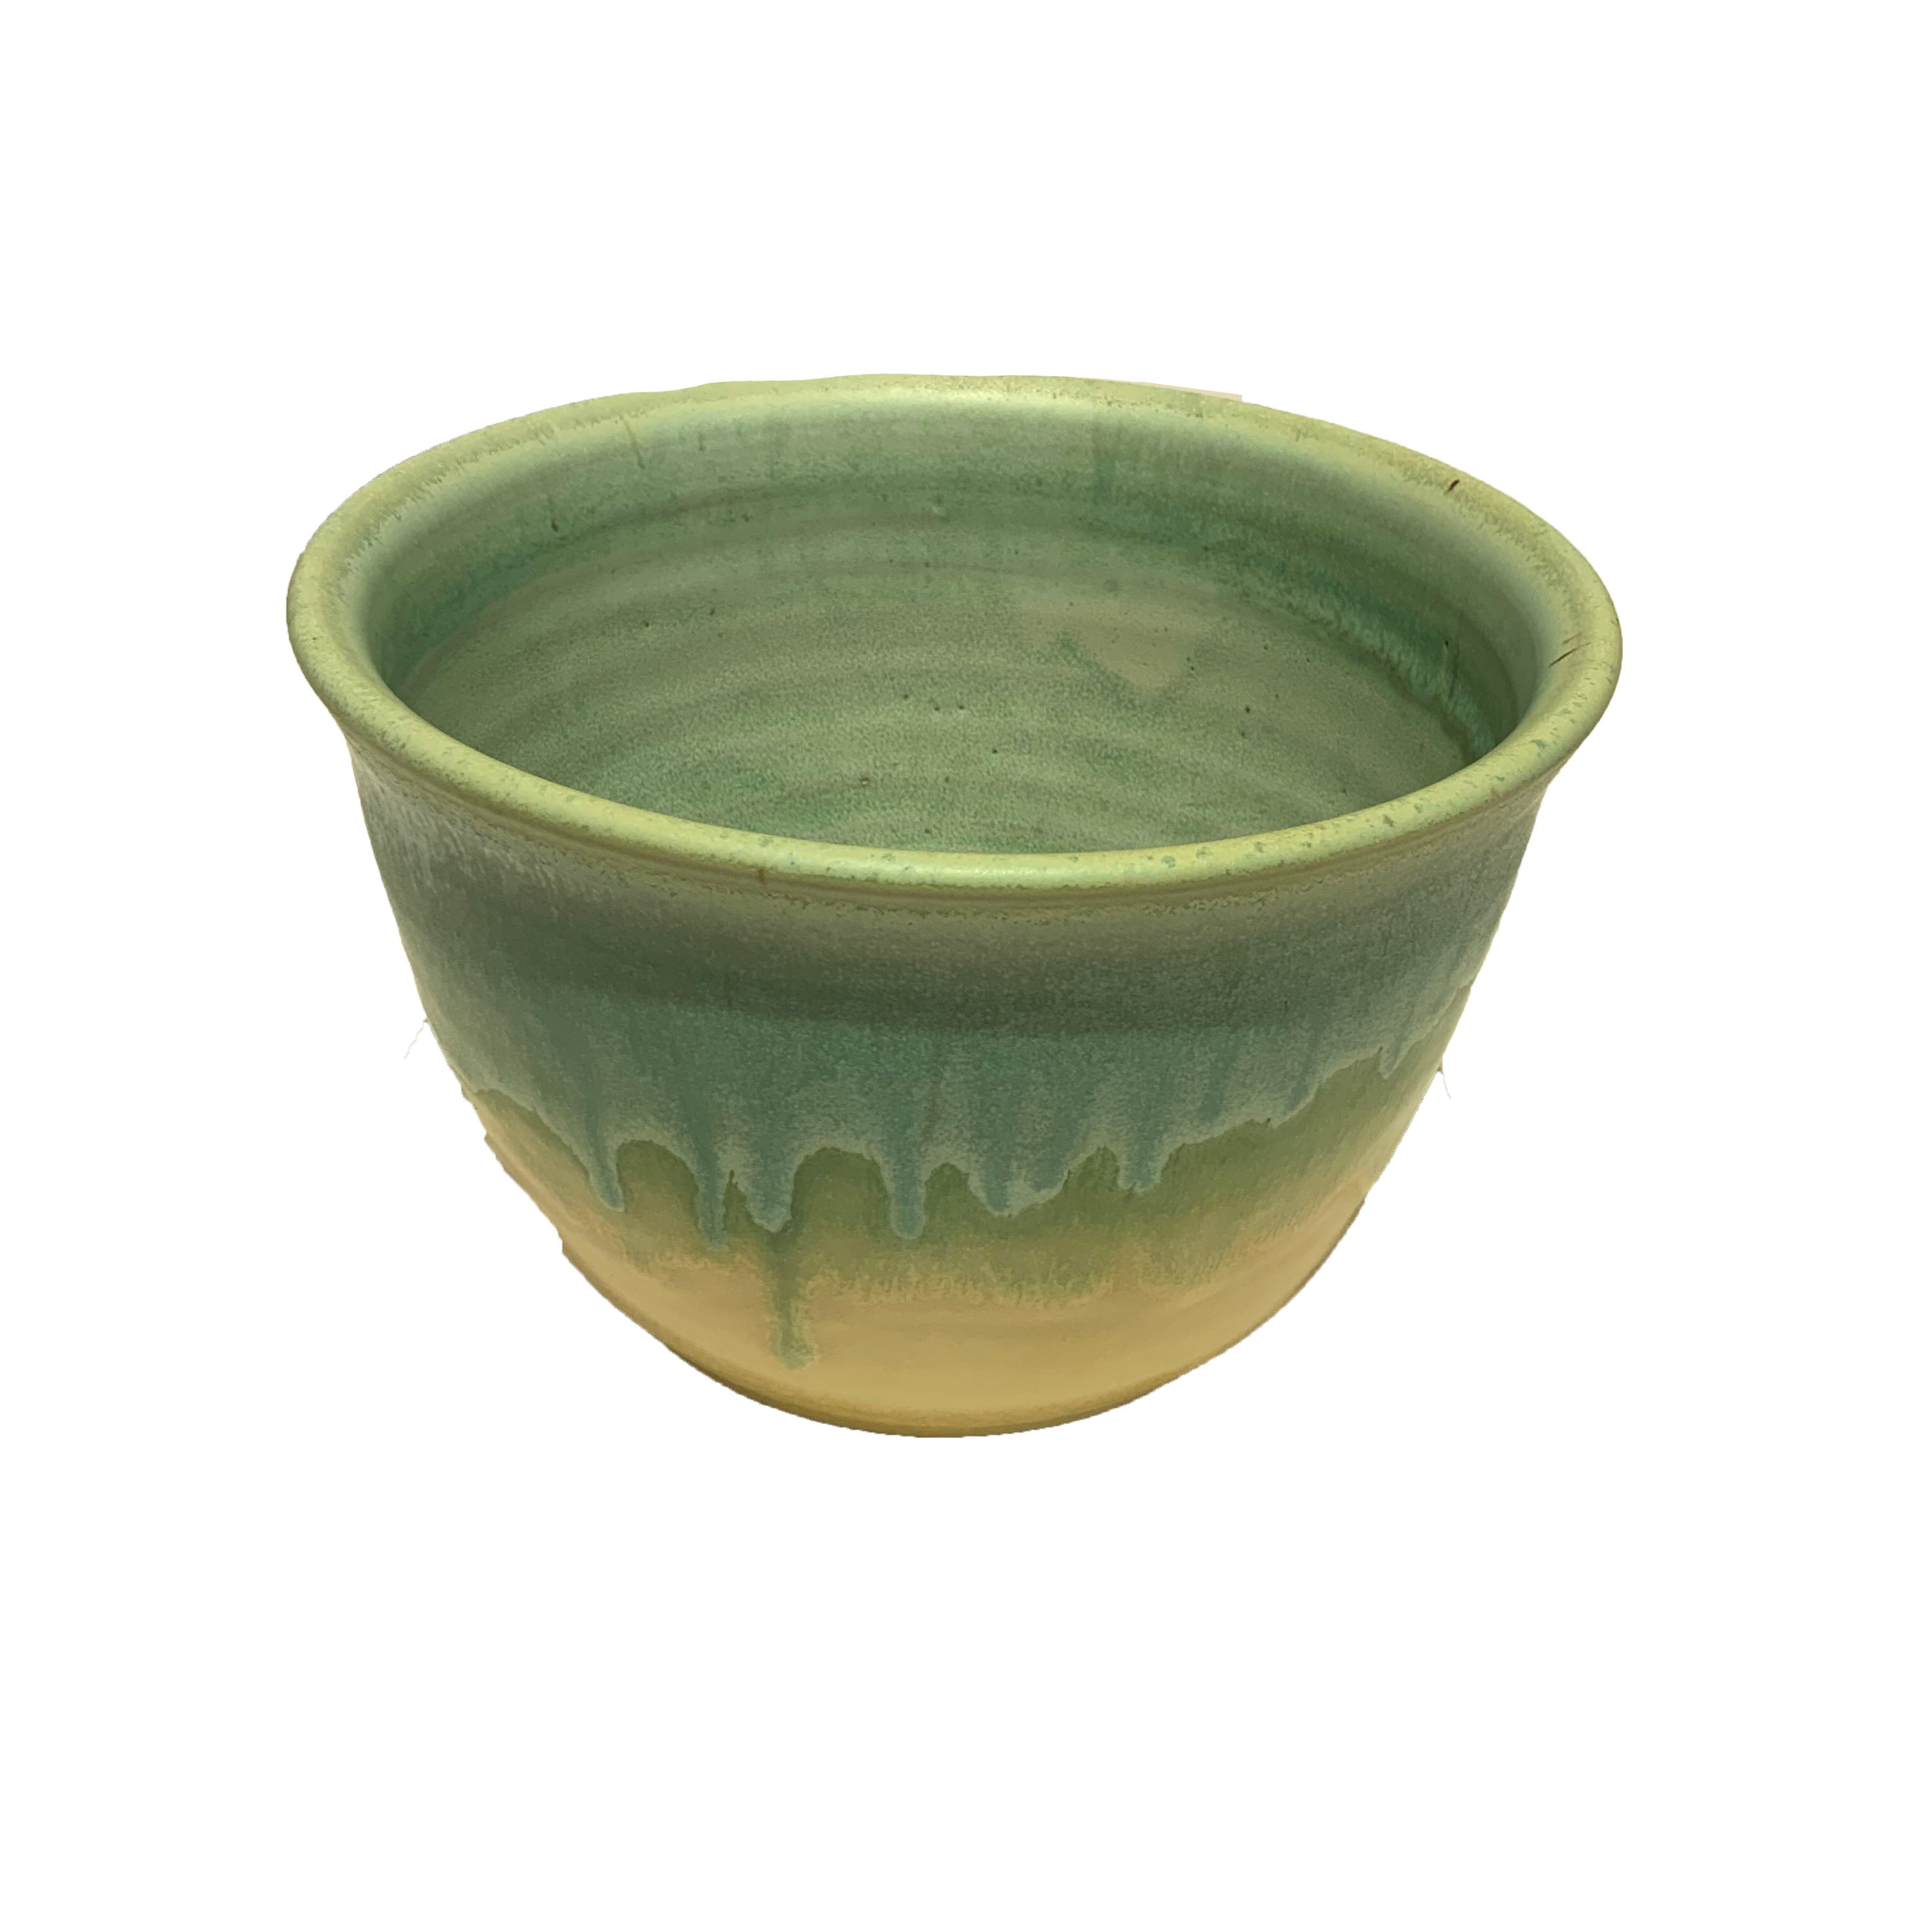 SMALL MIXING BOWL - CREAM AND MINT MATTE